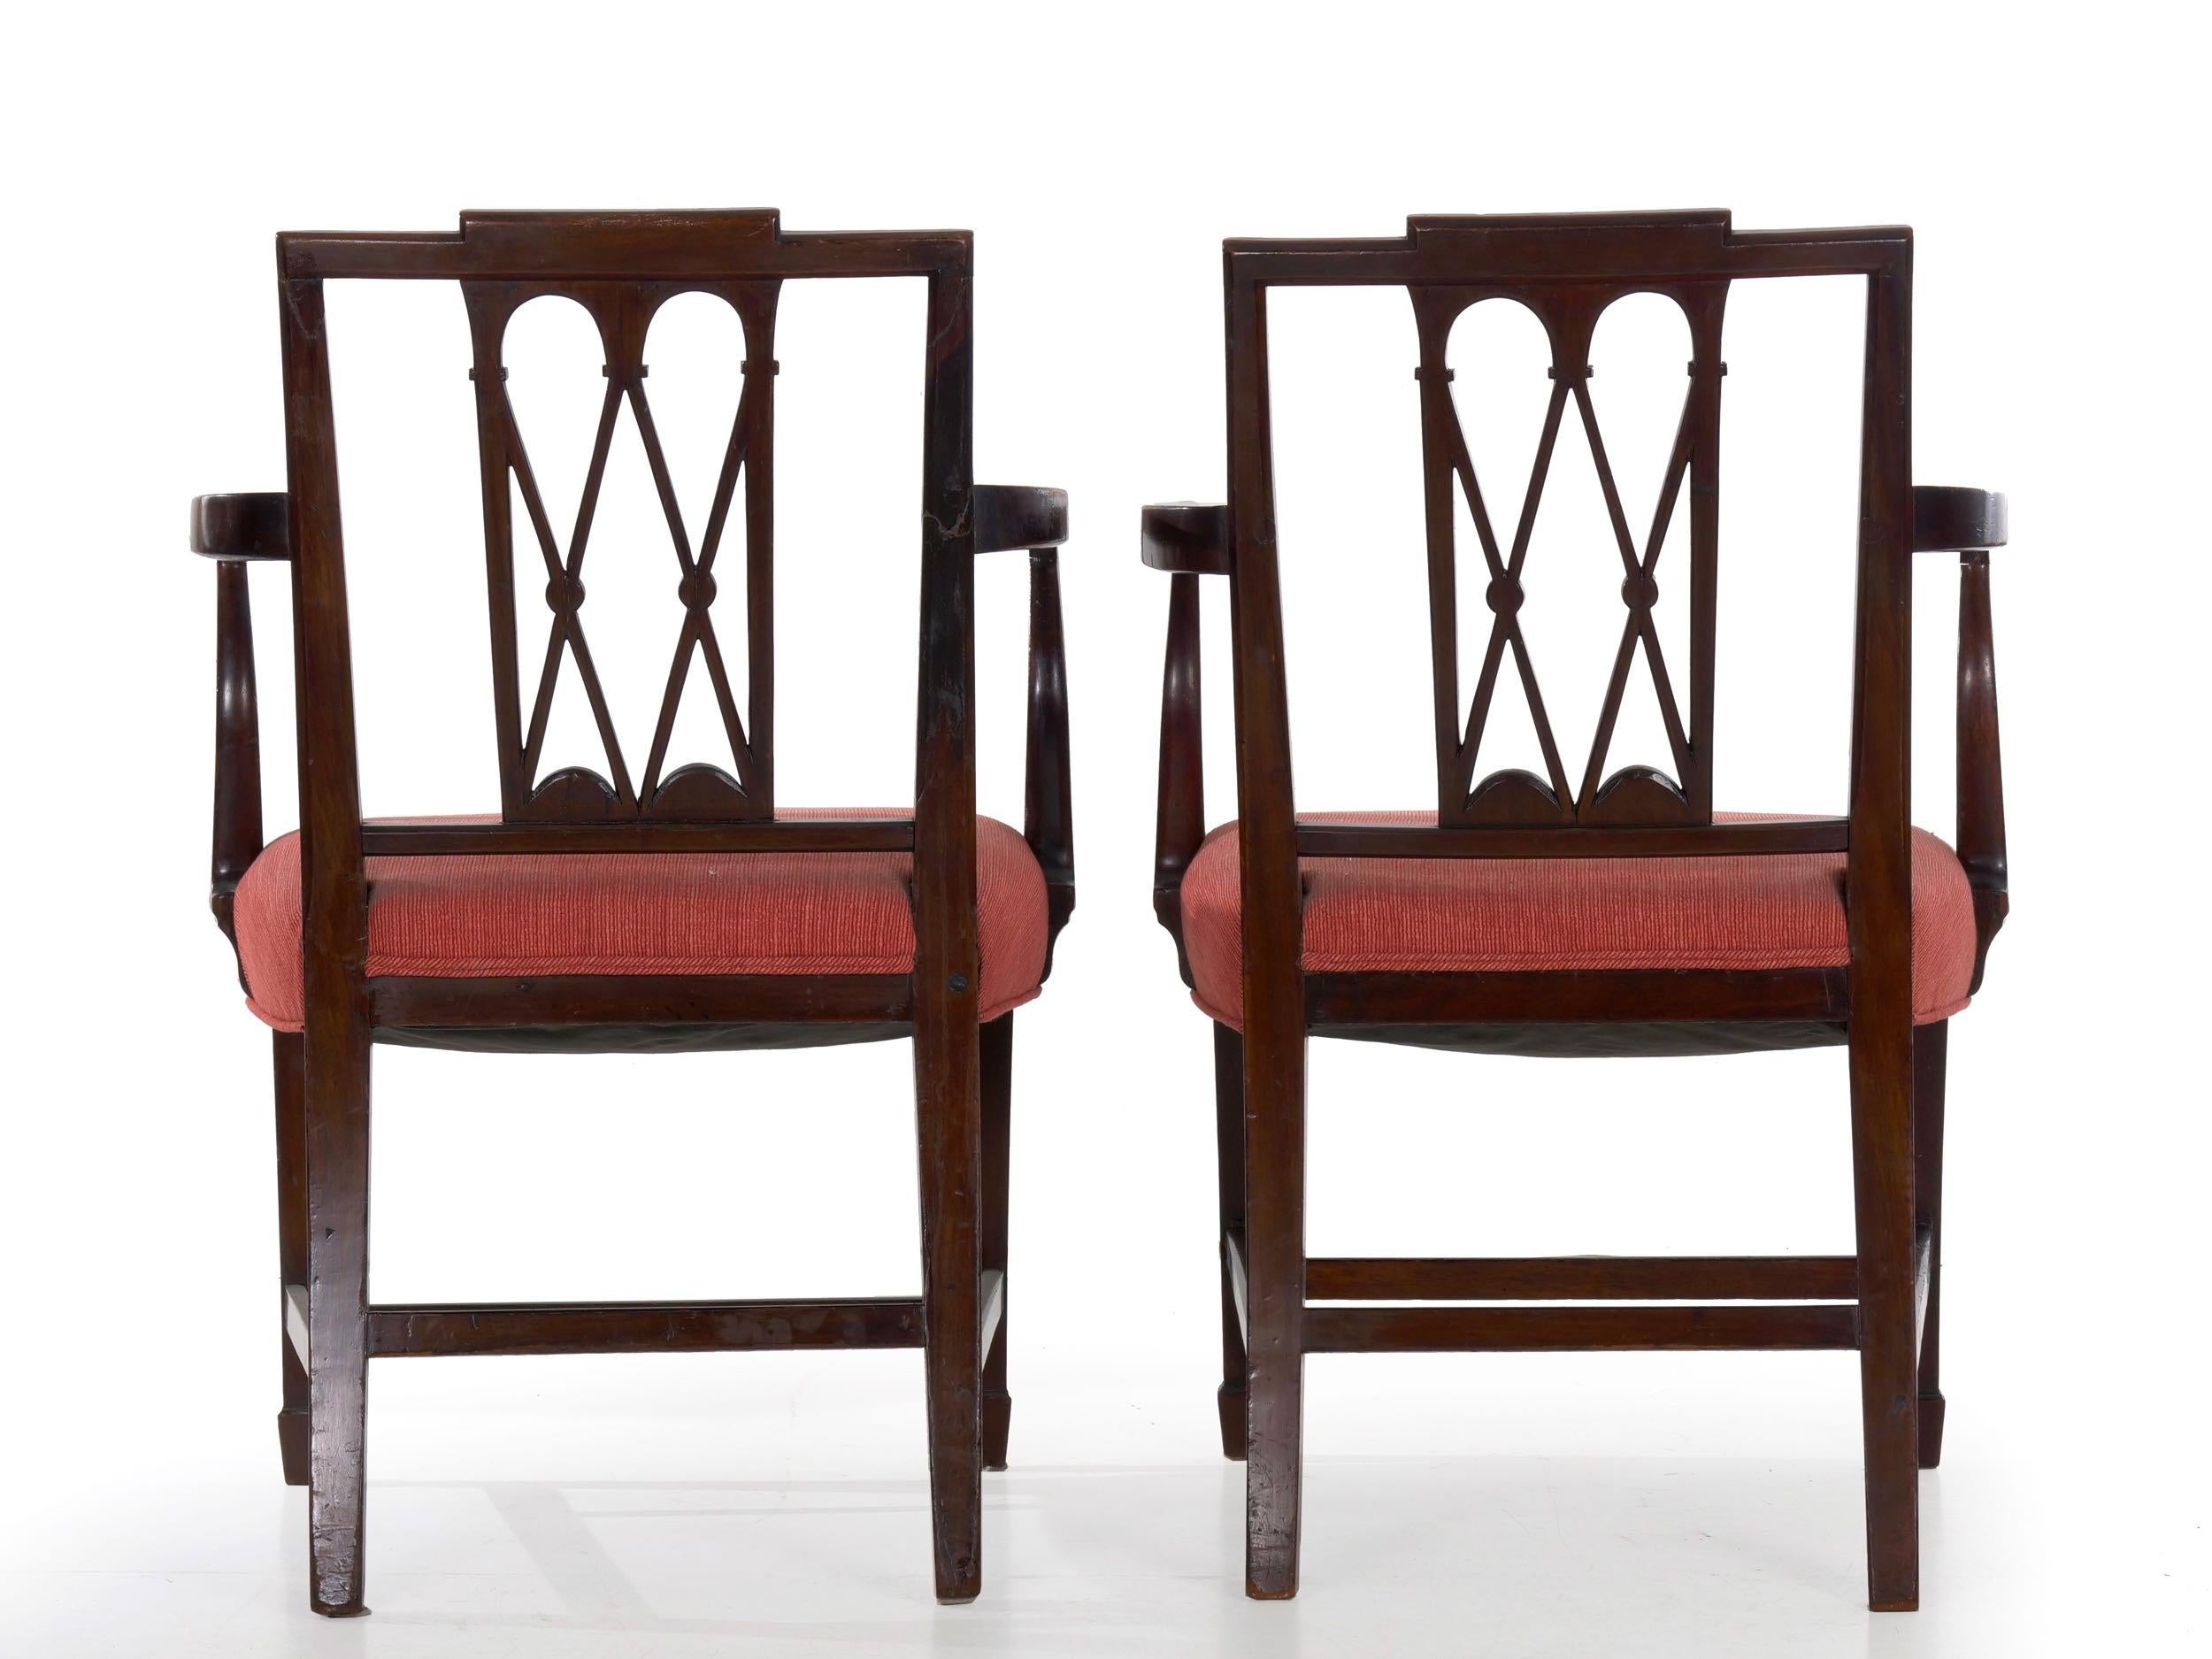 Upholstery 19th Century English Regency Antique Carved Mahogany Dining Chairs, Set of 8